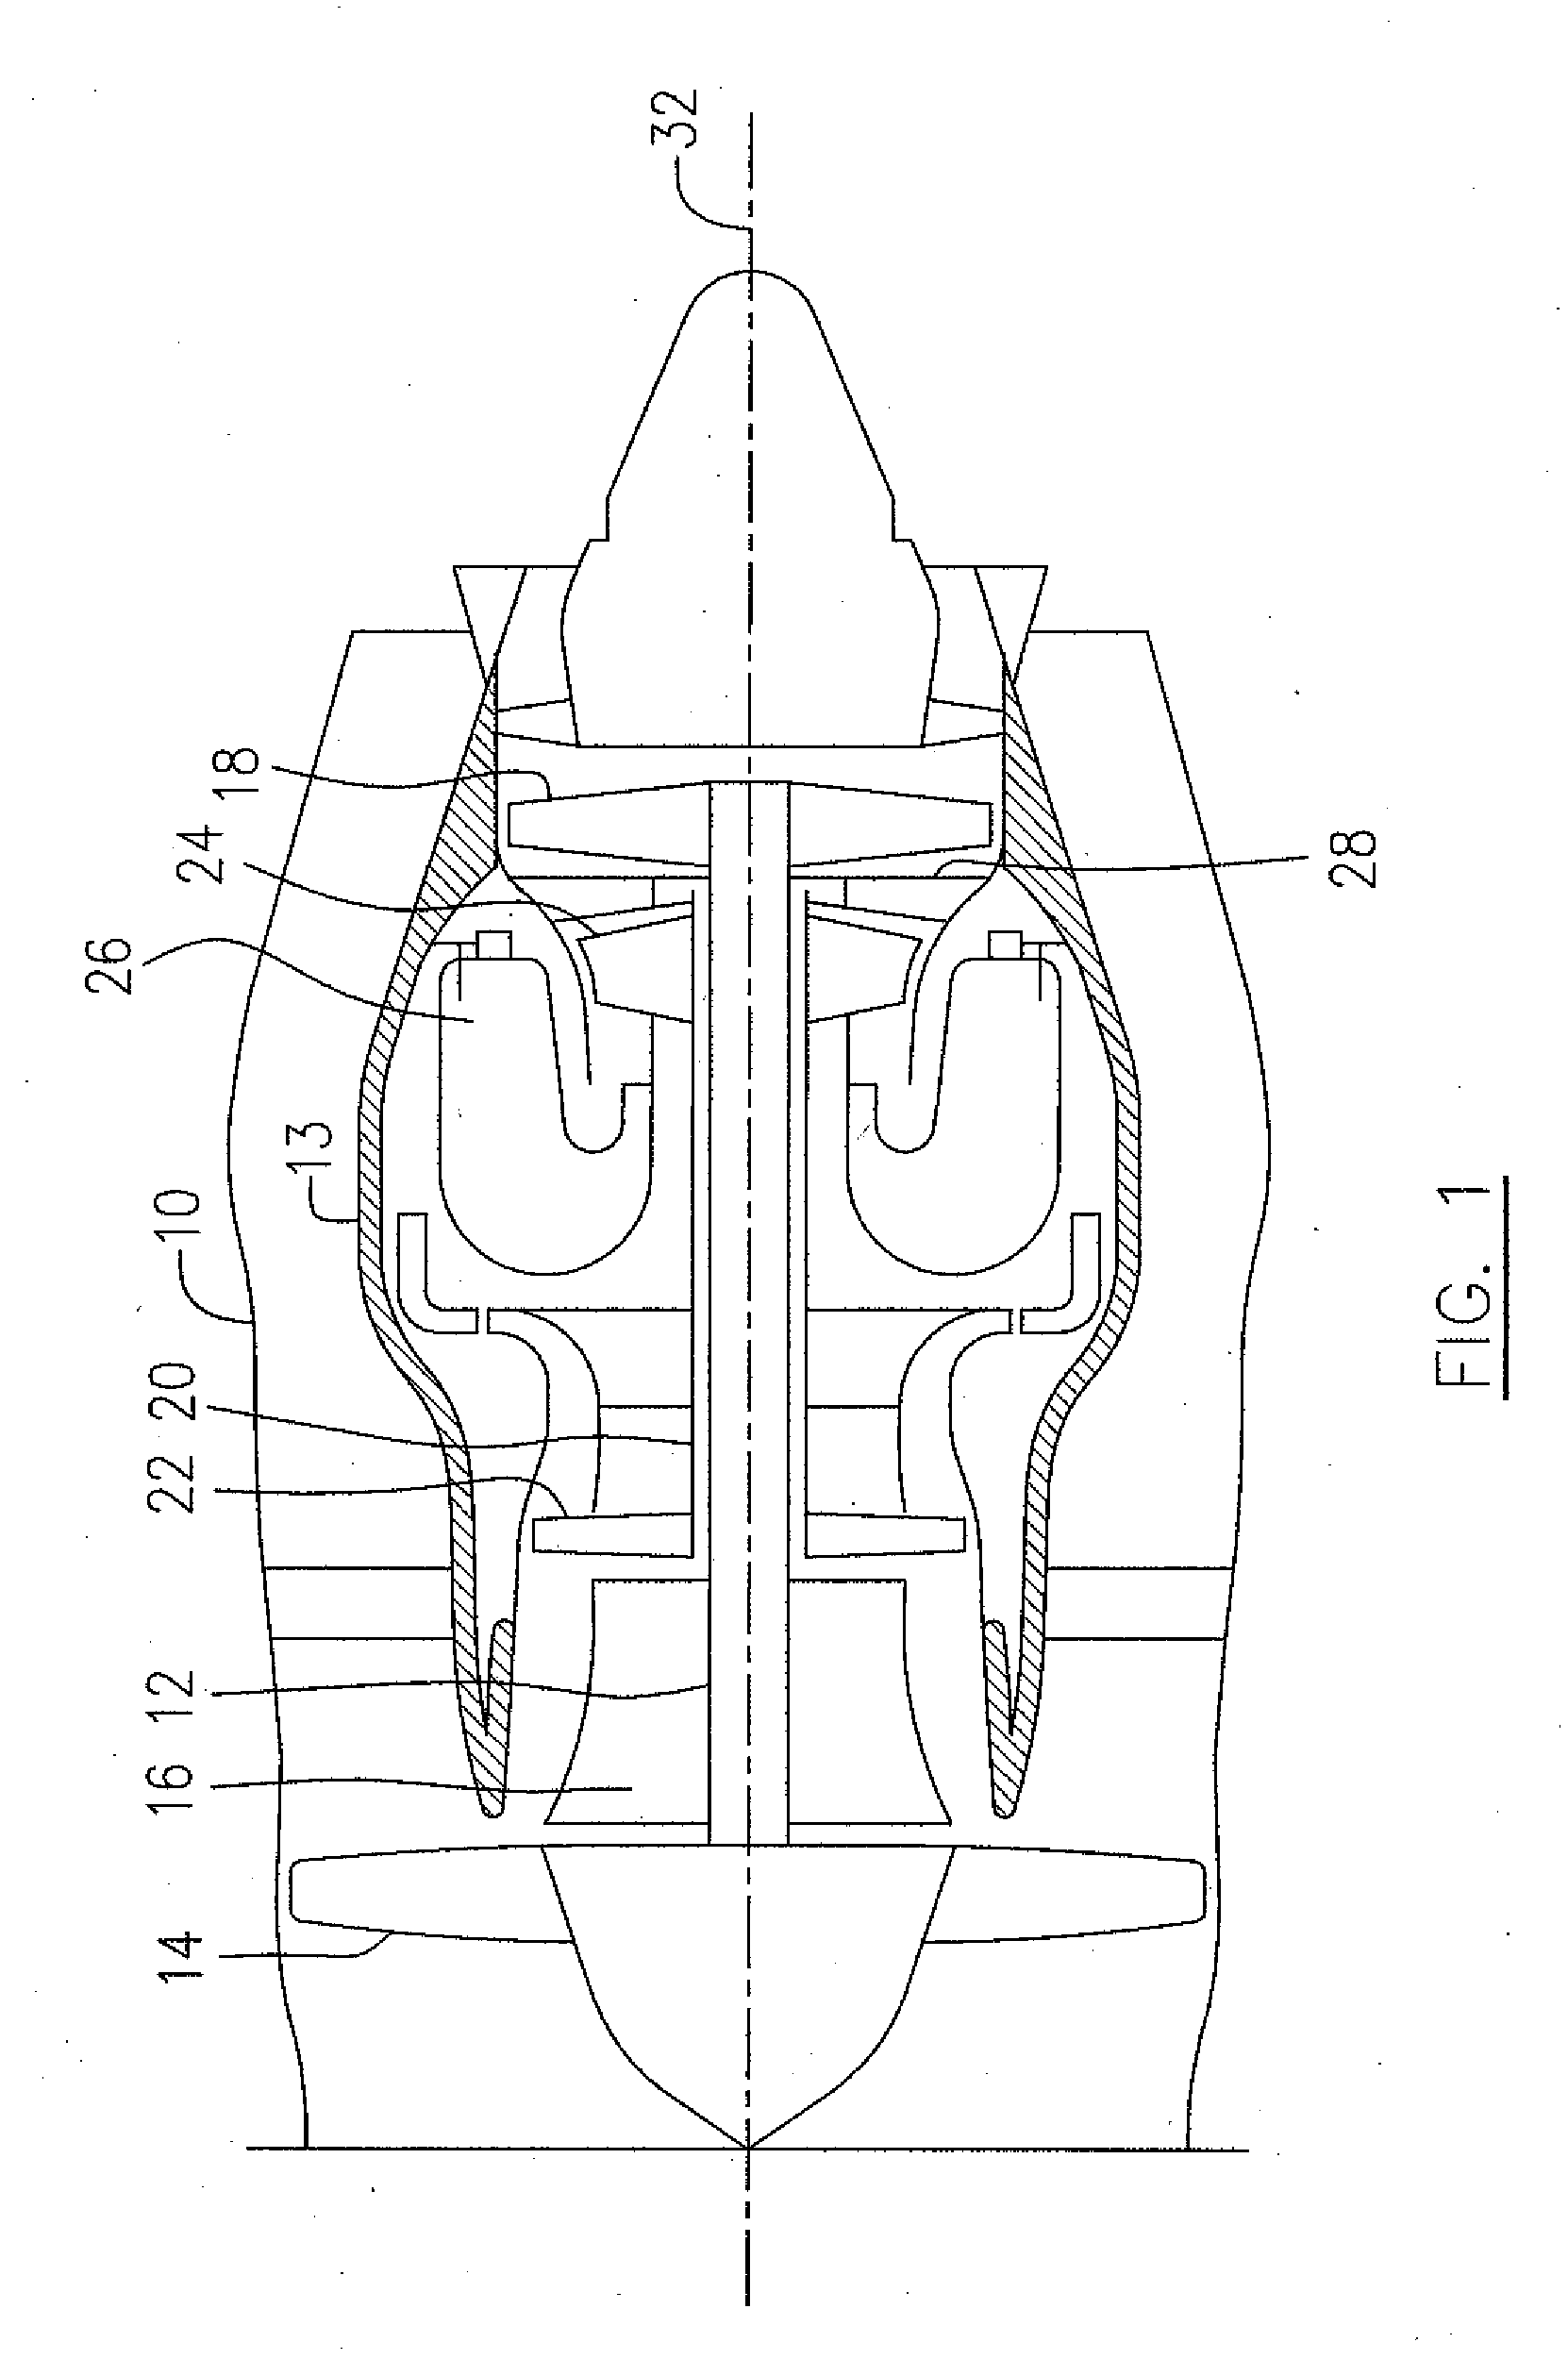 Deflector for a gas turbine strut and vane assembly